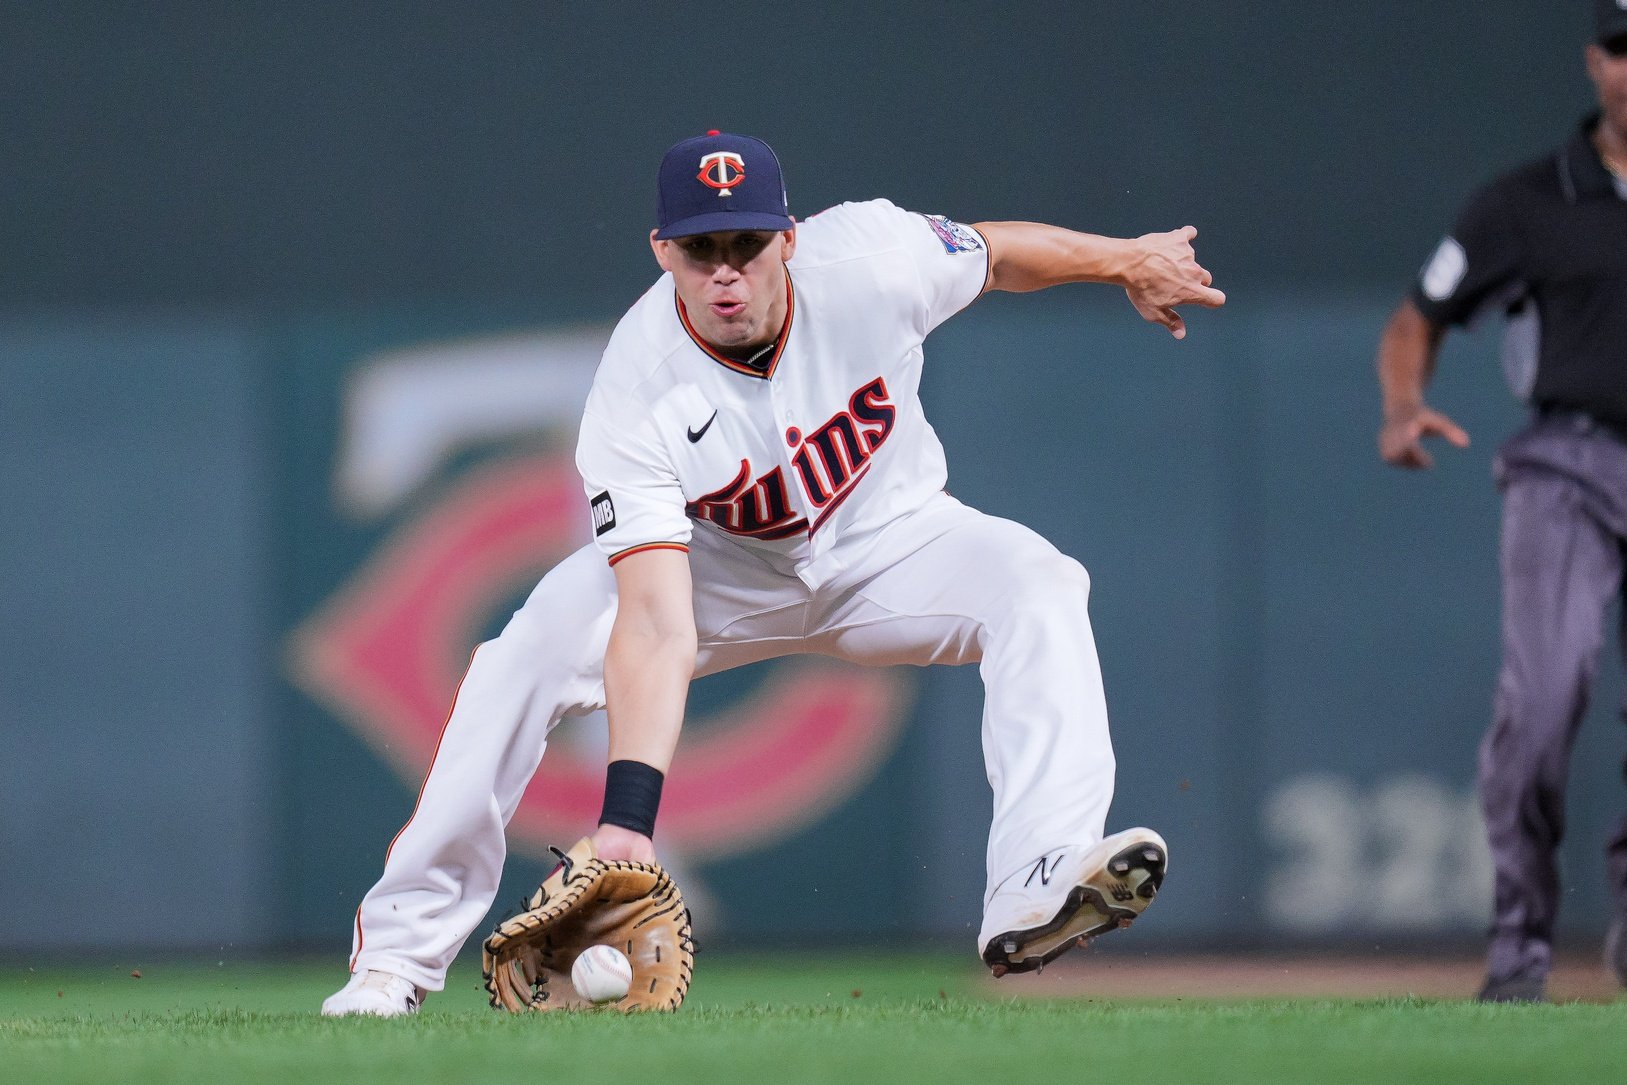 Minnesota Twins: The Top 5 First Basemen in Franchise History